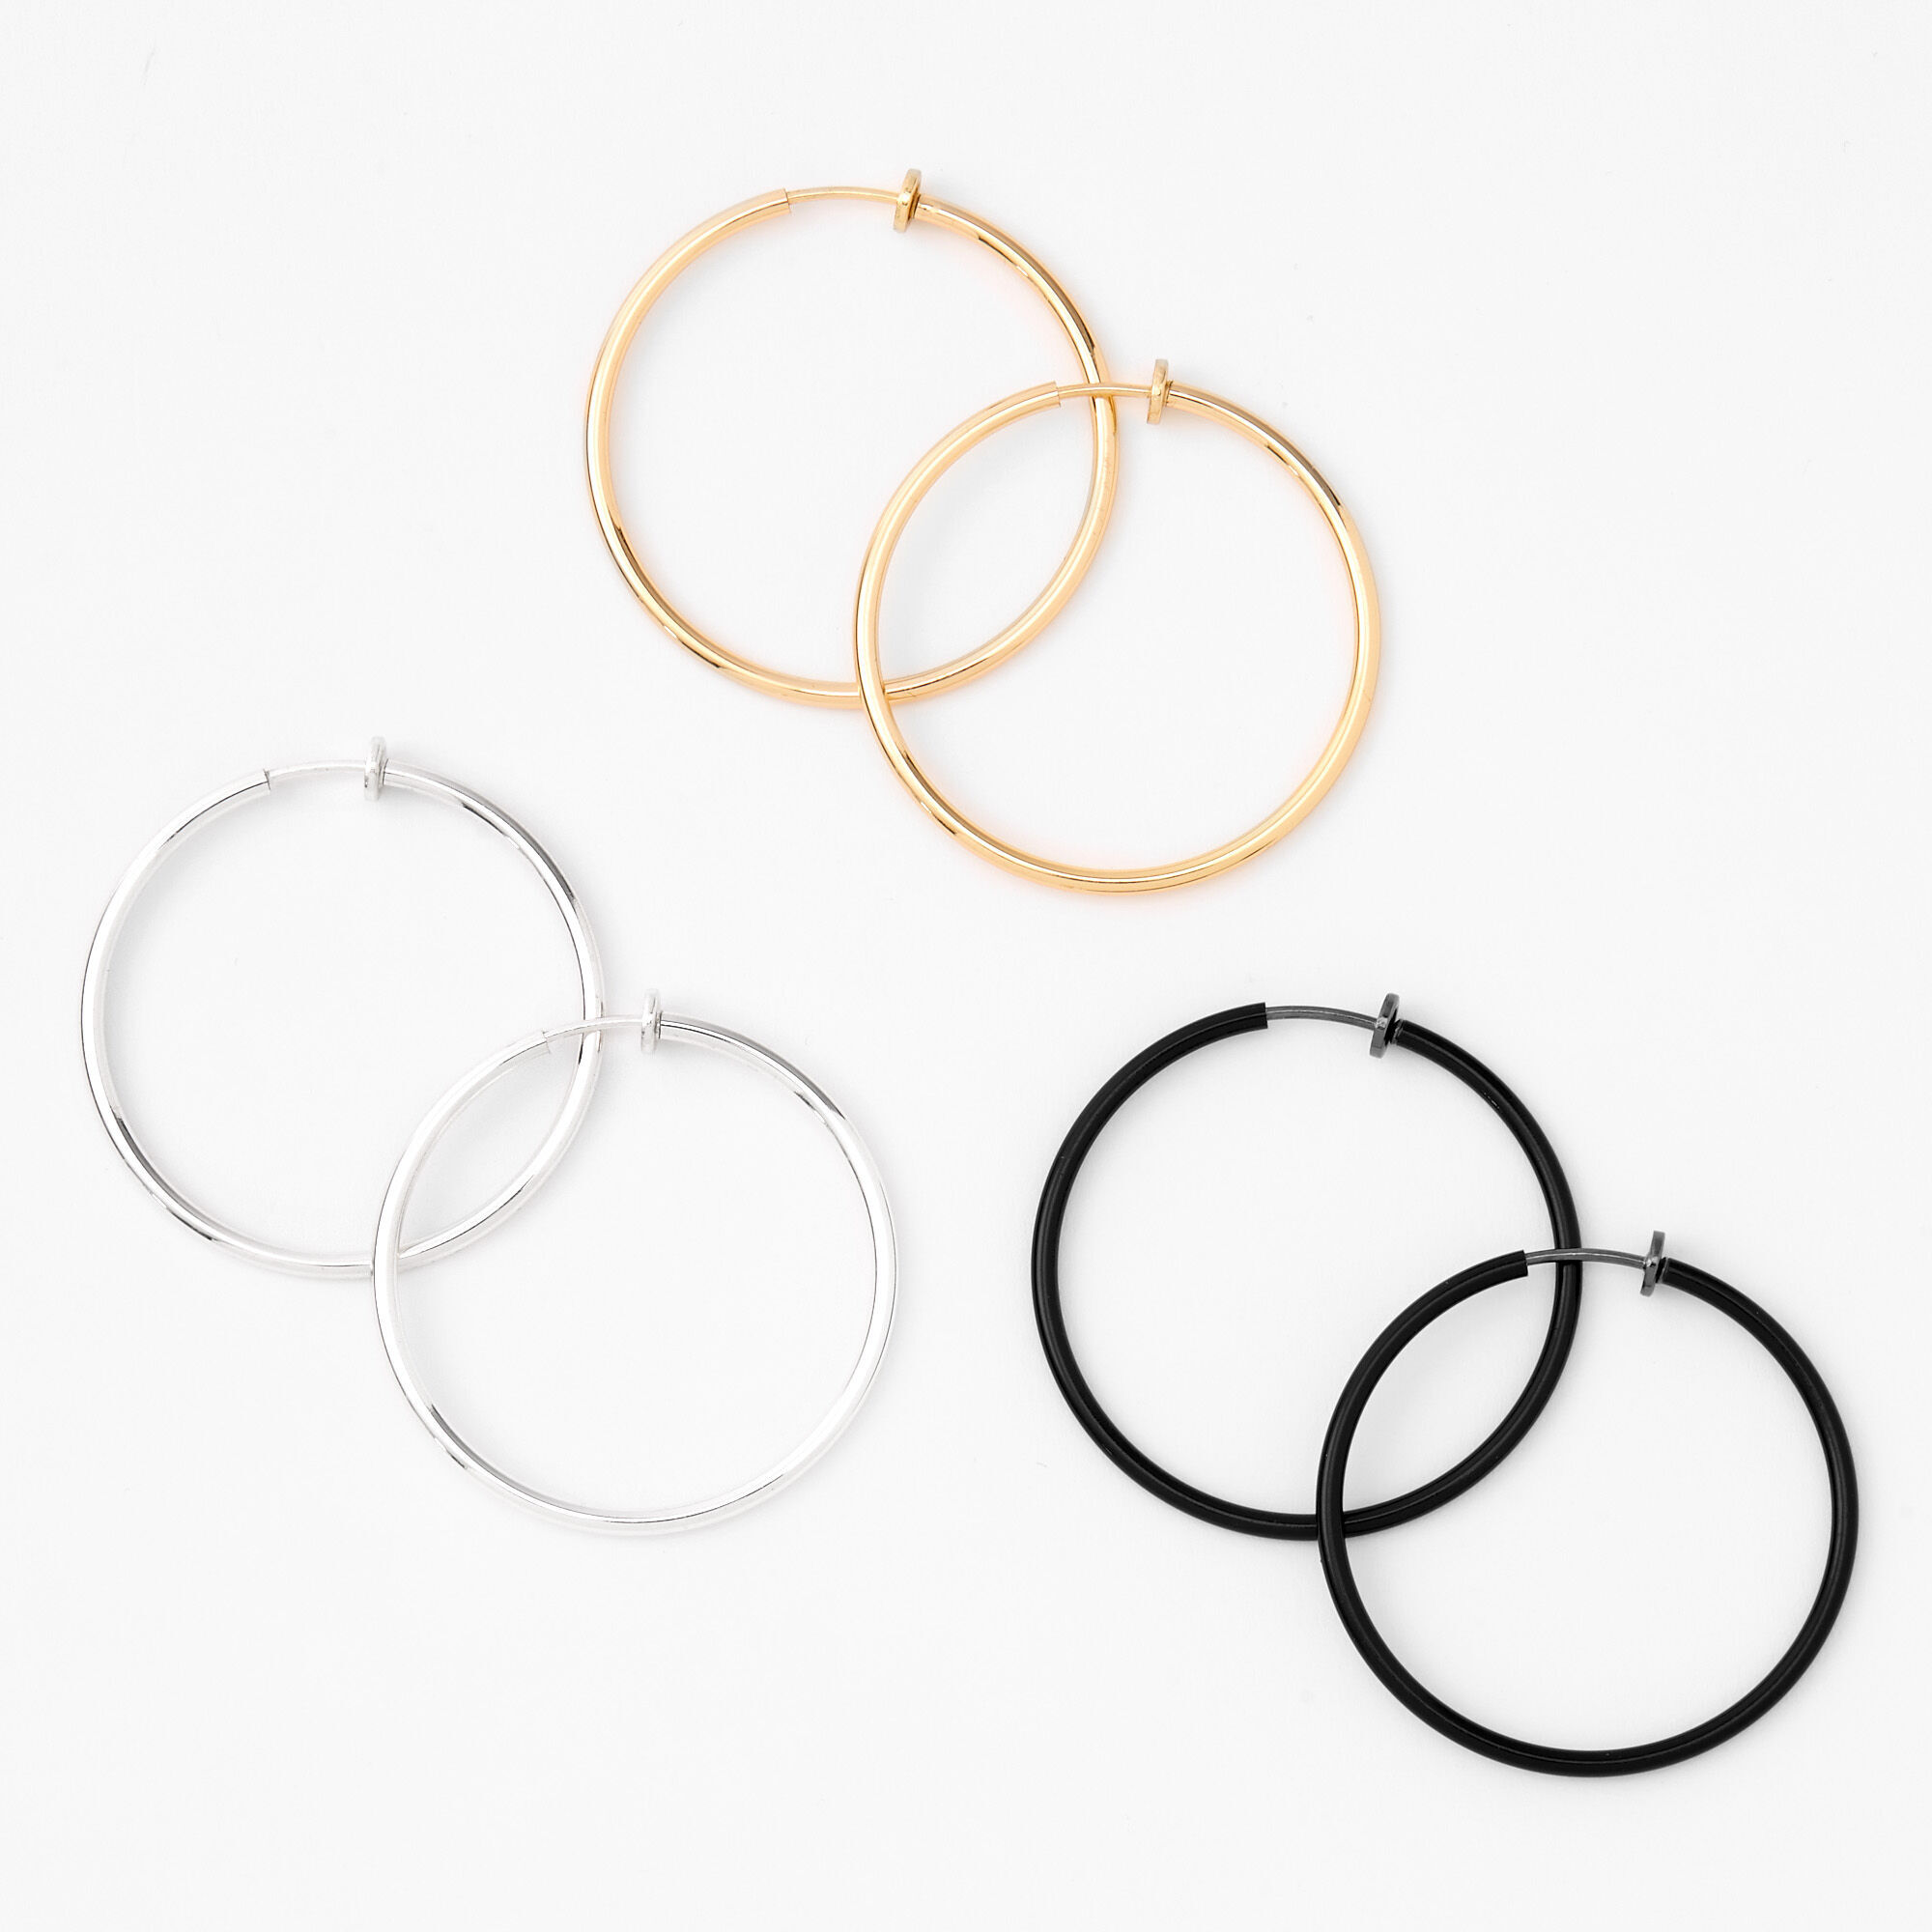 View Claires Mixed Metal 40MM Clip On Hoop Earrings 3 Pack Gold information